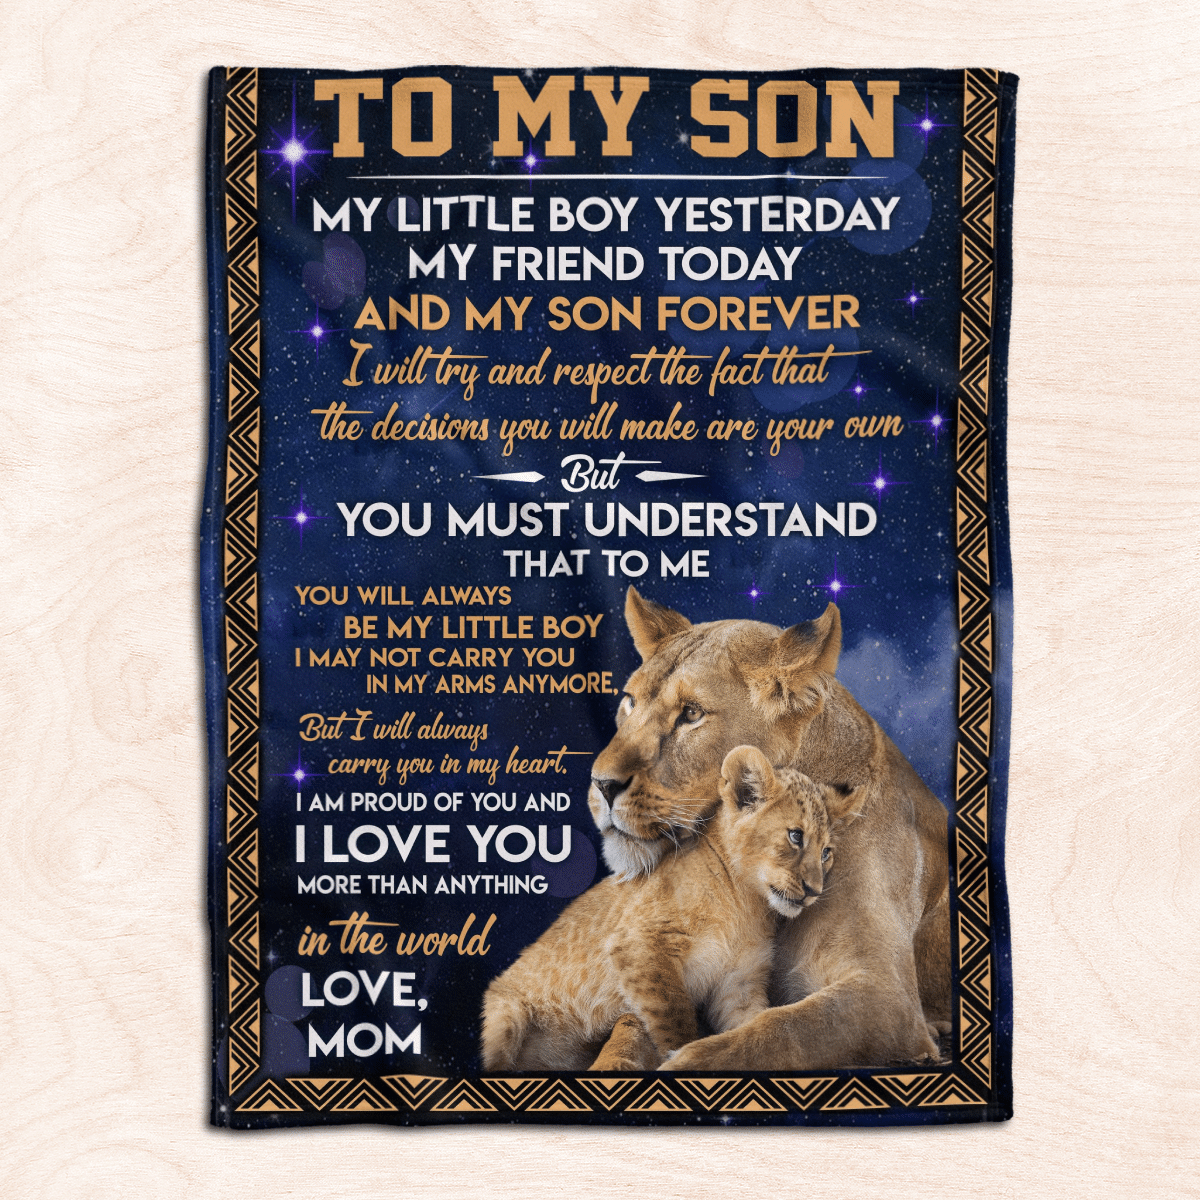 Lion to my son my litte boy yesterday my friend today and my son forever blanket 1